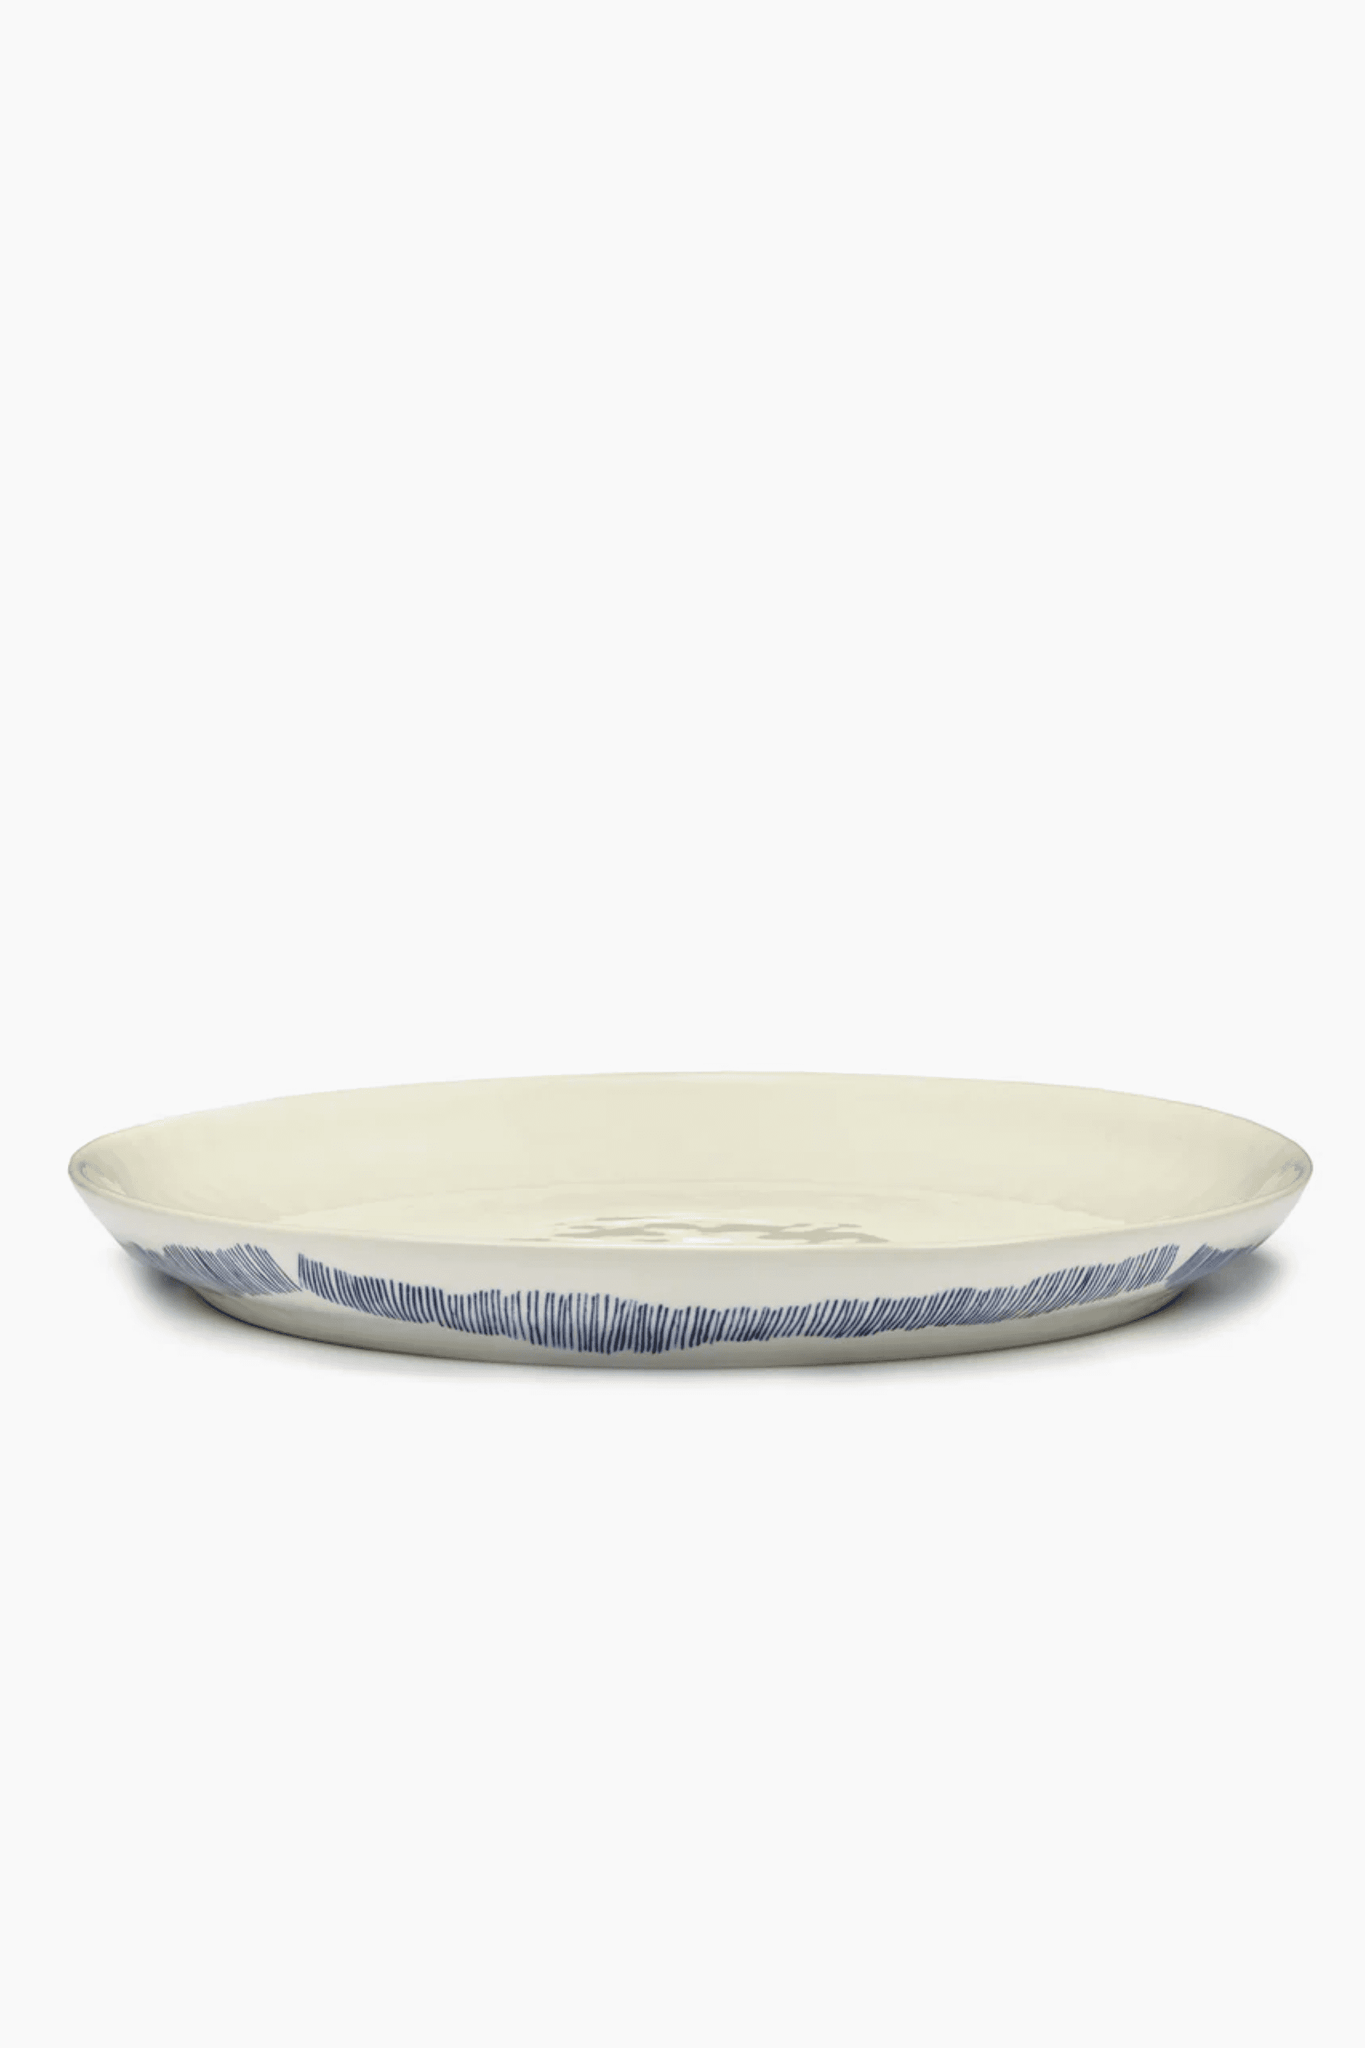 Small Serving Plate, White Swirl with Blue Stripes Ottolenghi Serax, side view